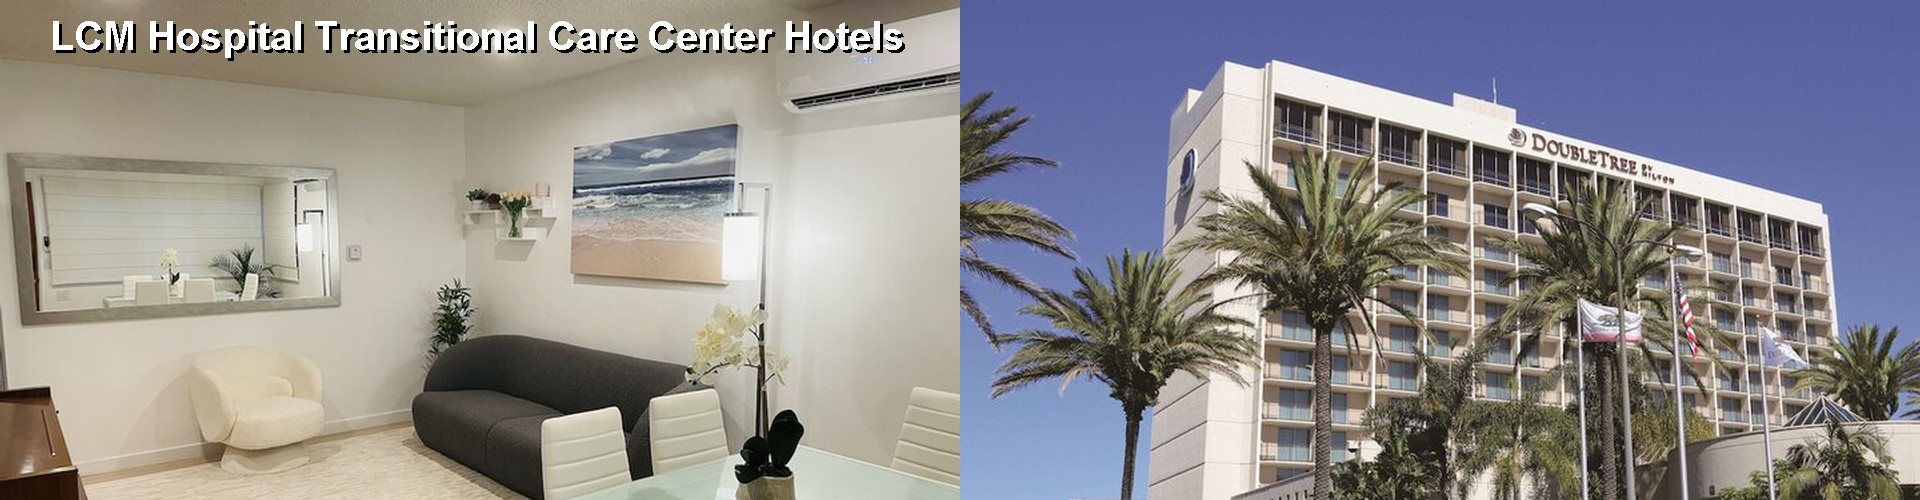 5 Best Hotels near LCM Hospital Transitional Care Center